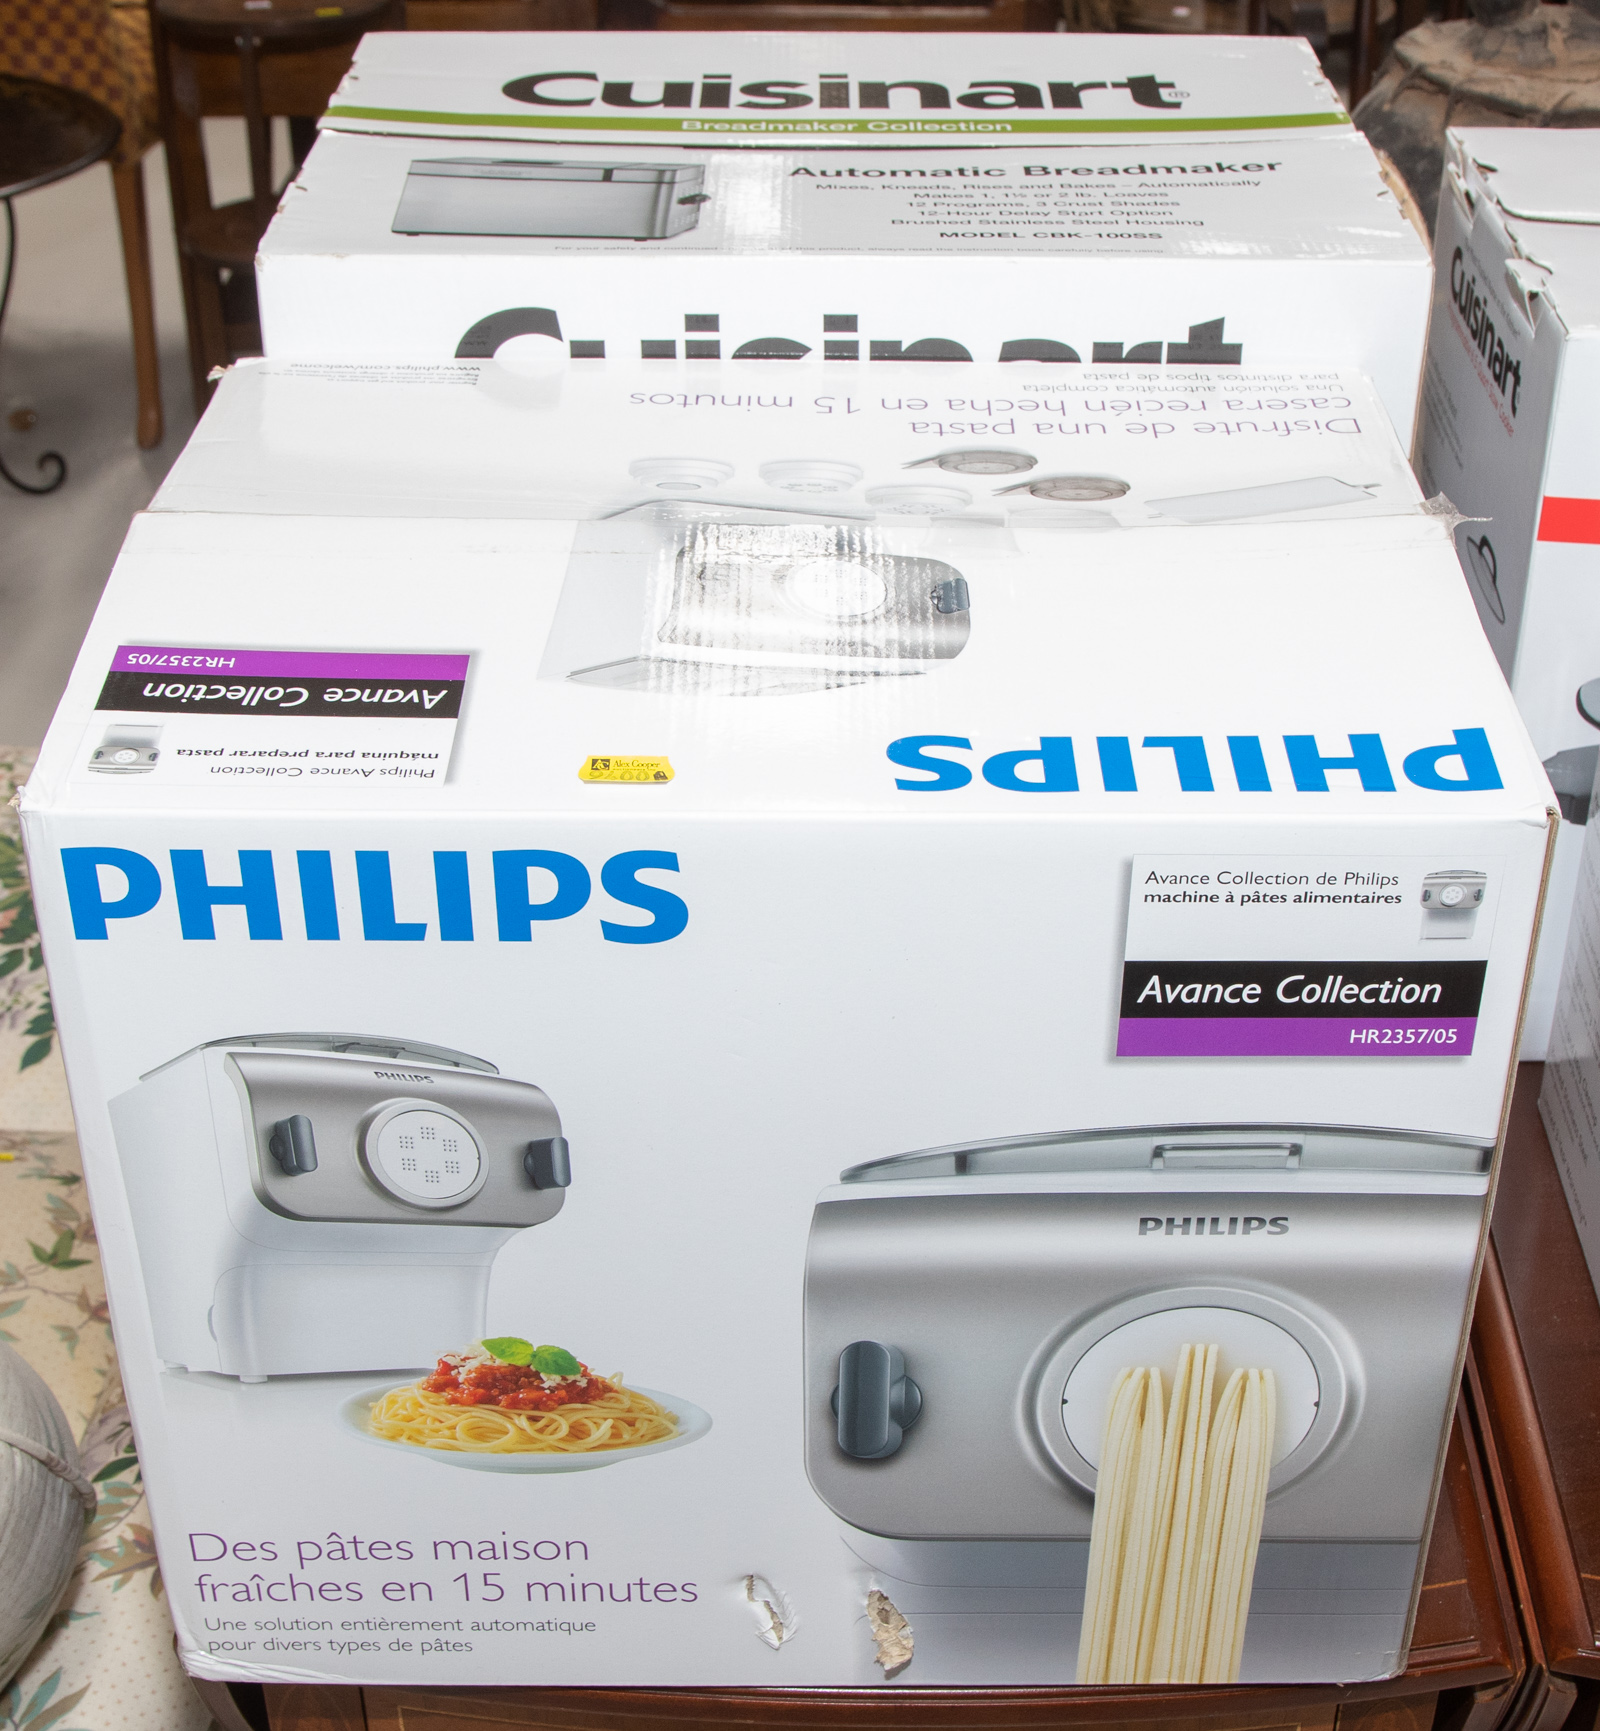 TWO NEW IN BOX KITCHEN APPLIANCES